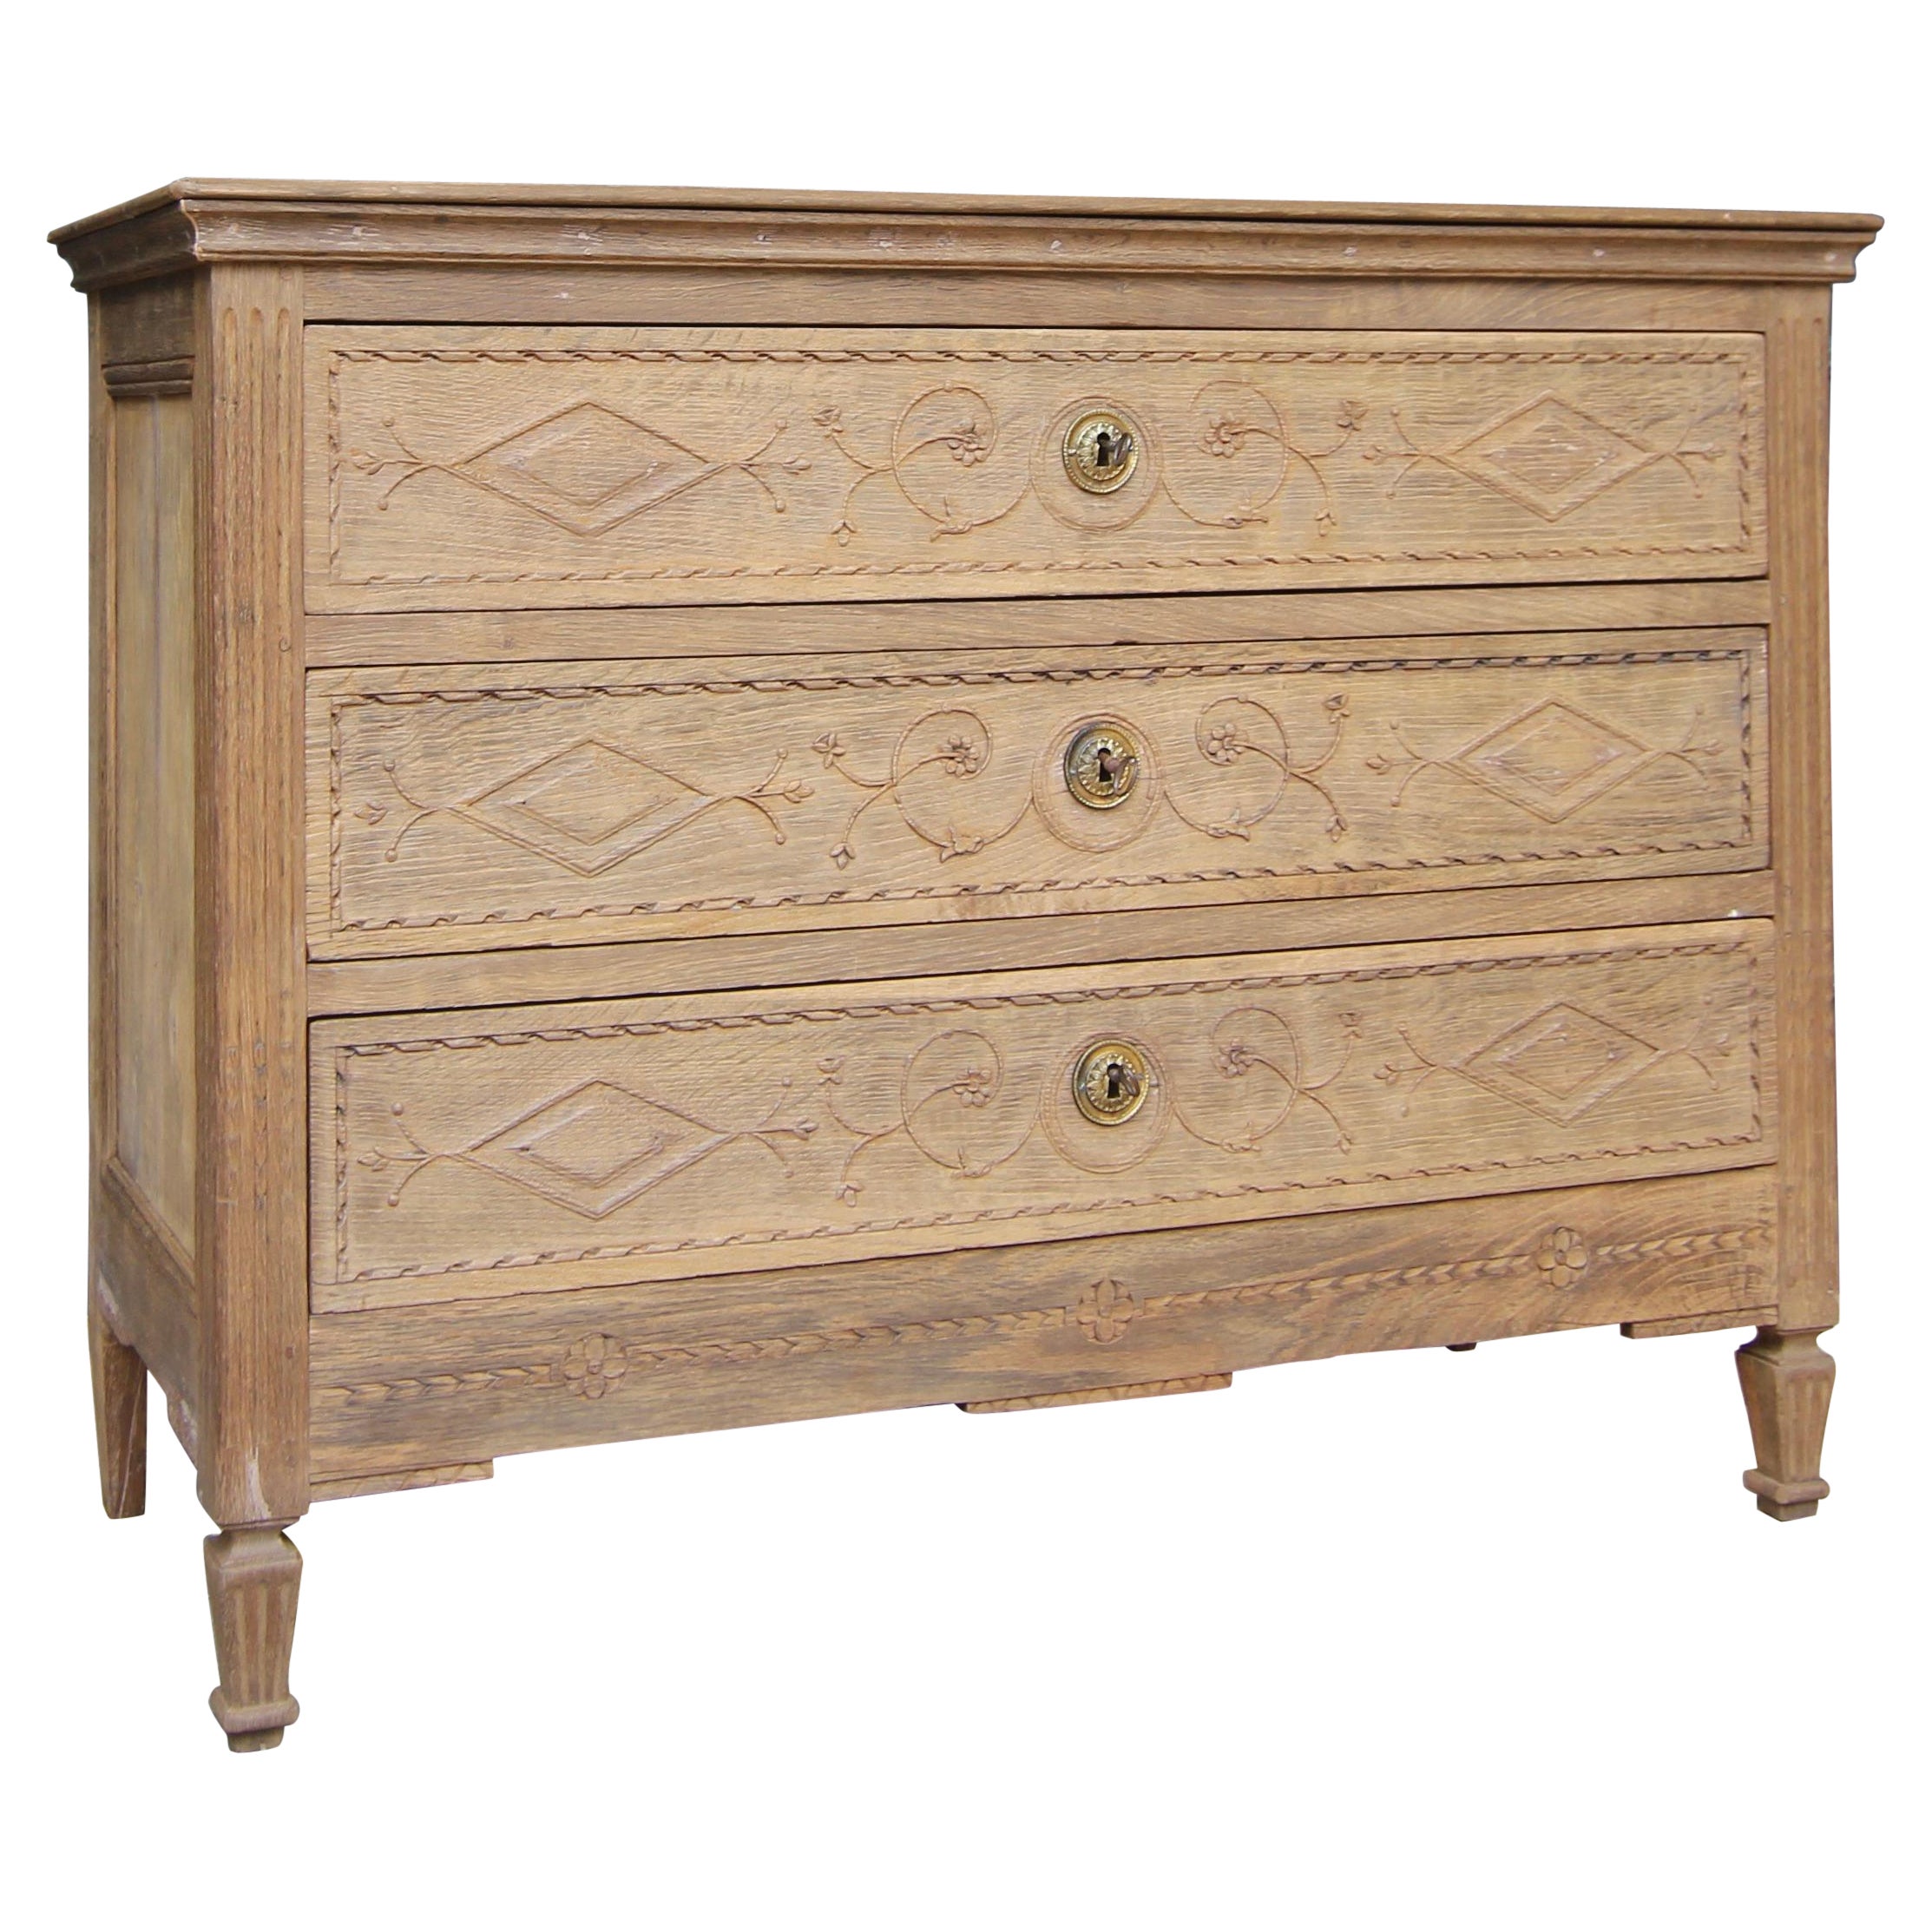 Early 19th Century Stripped Oak Louis XVI Chest of Drawers